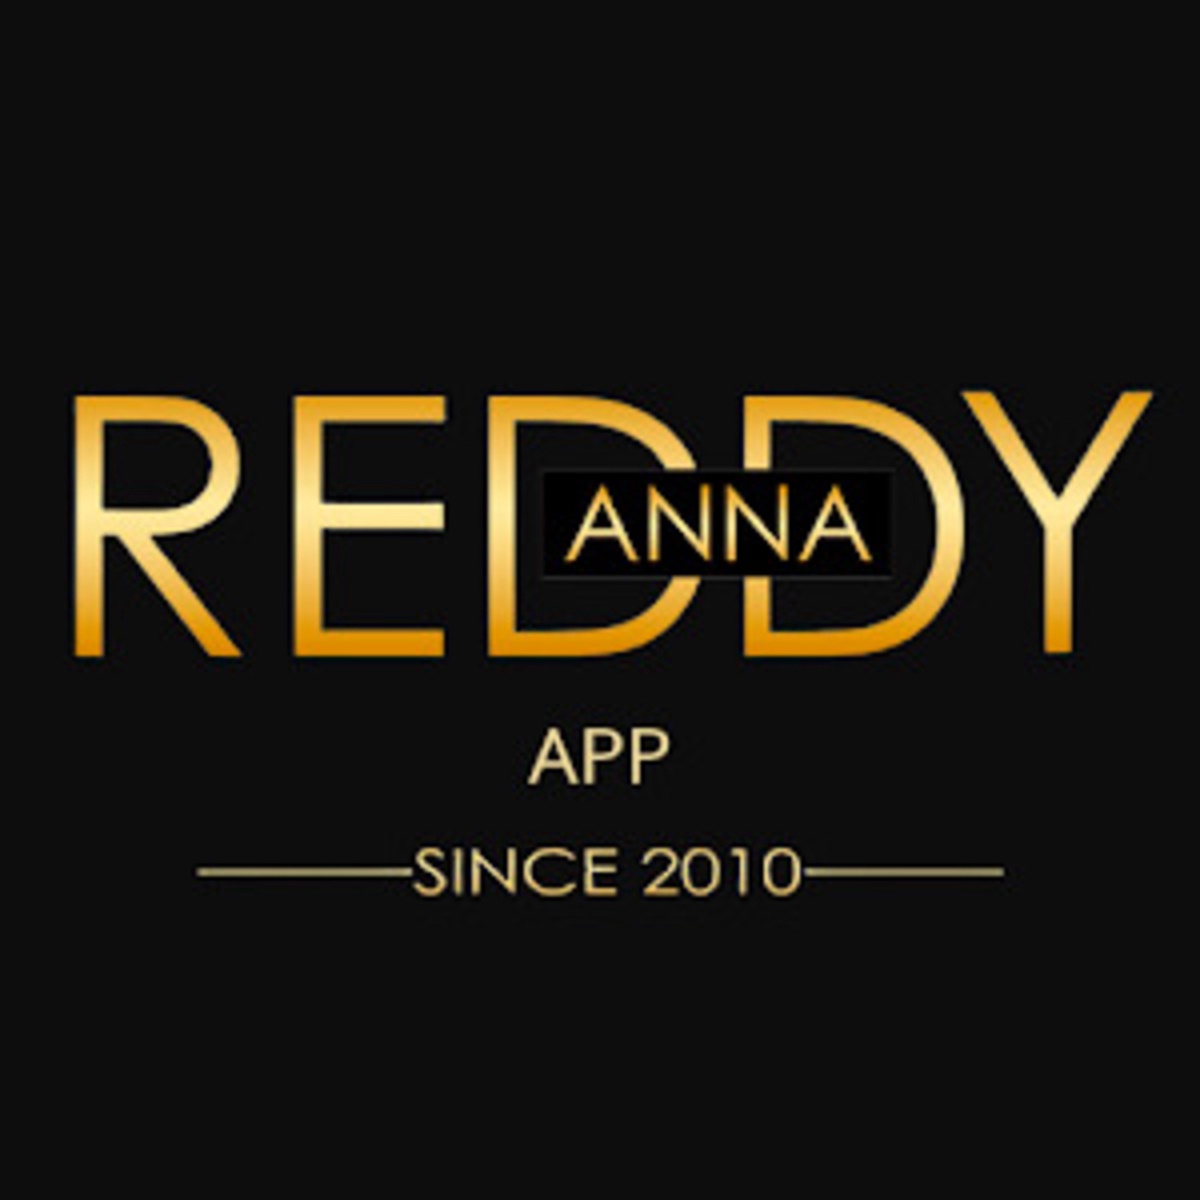 Reddy Anna is the Top Choice for Genuine ID Services in India